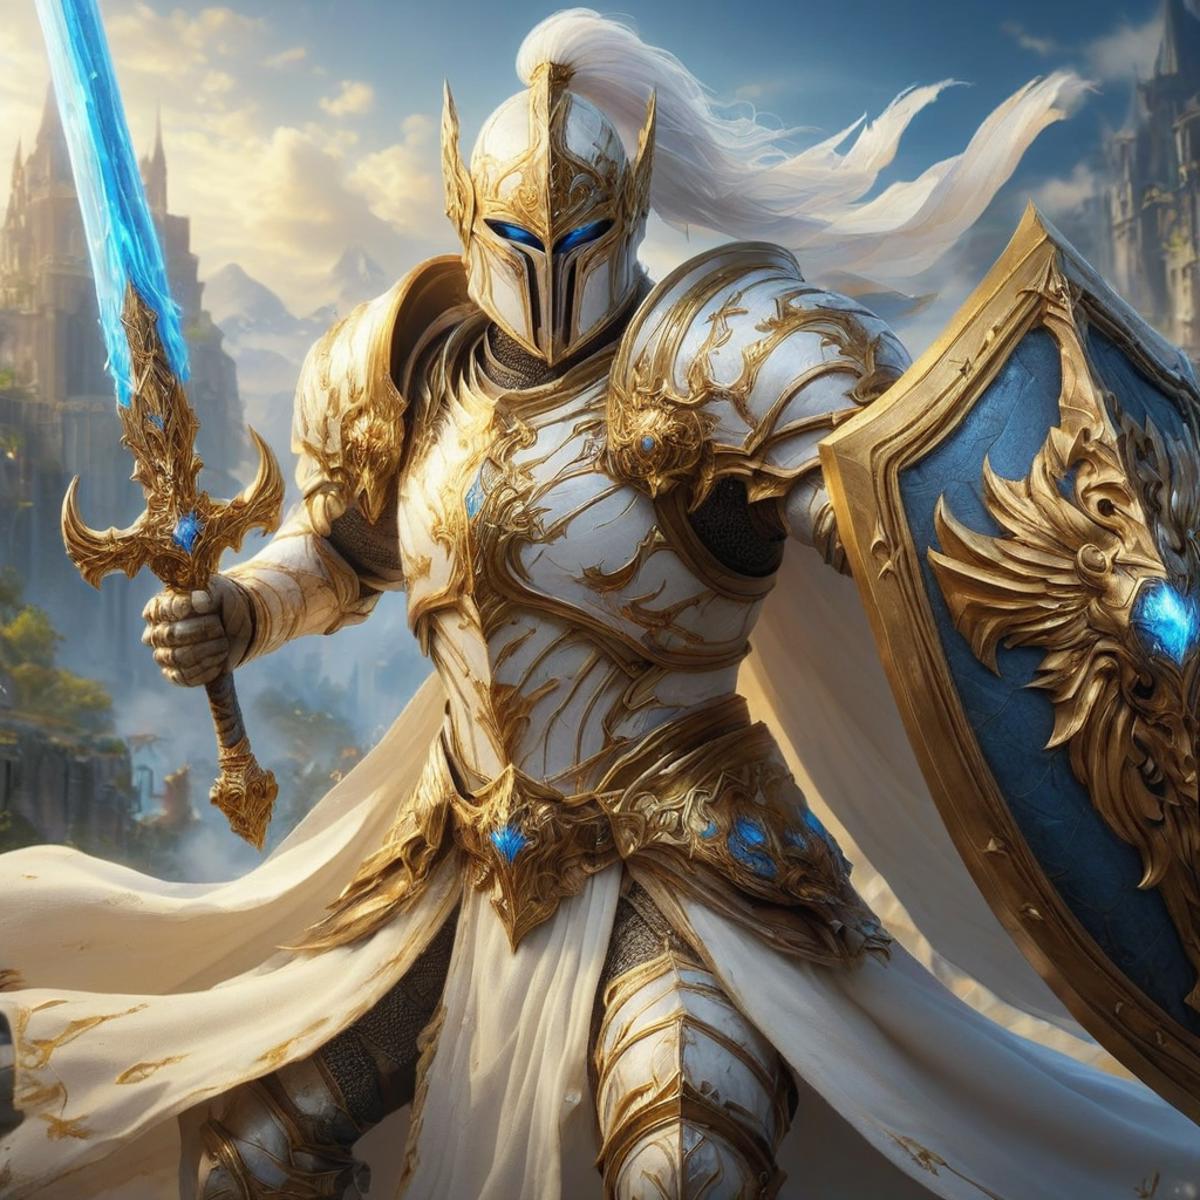 A 3D rendered image of a knight in white armor, holding a blue sword.